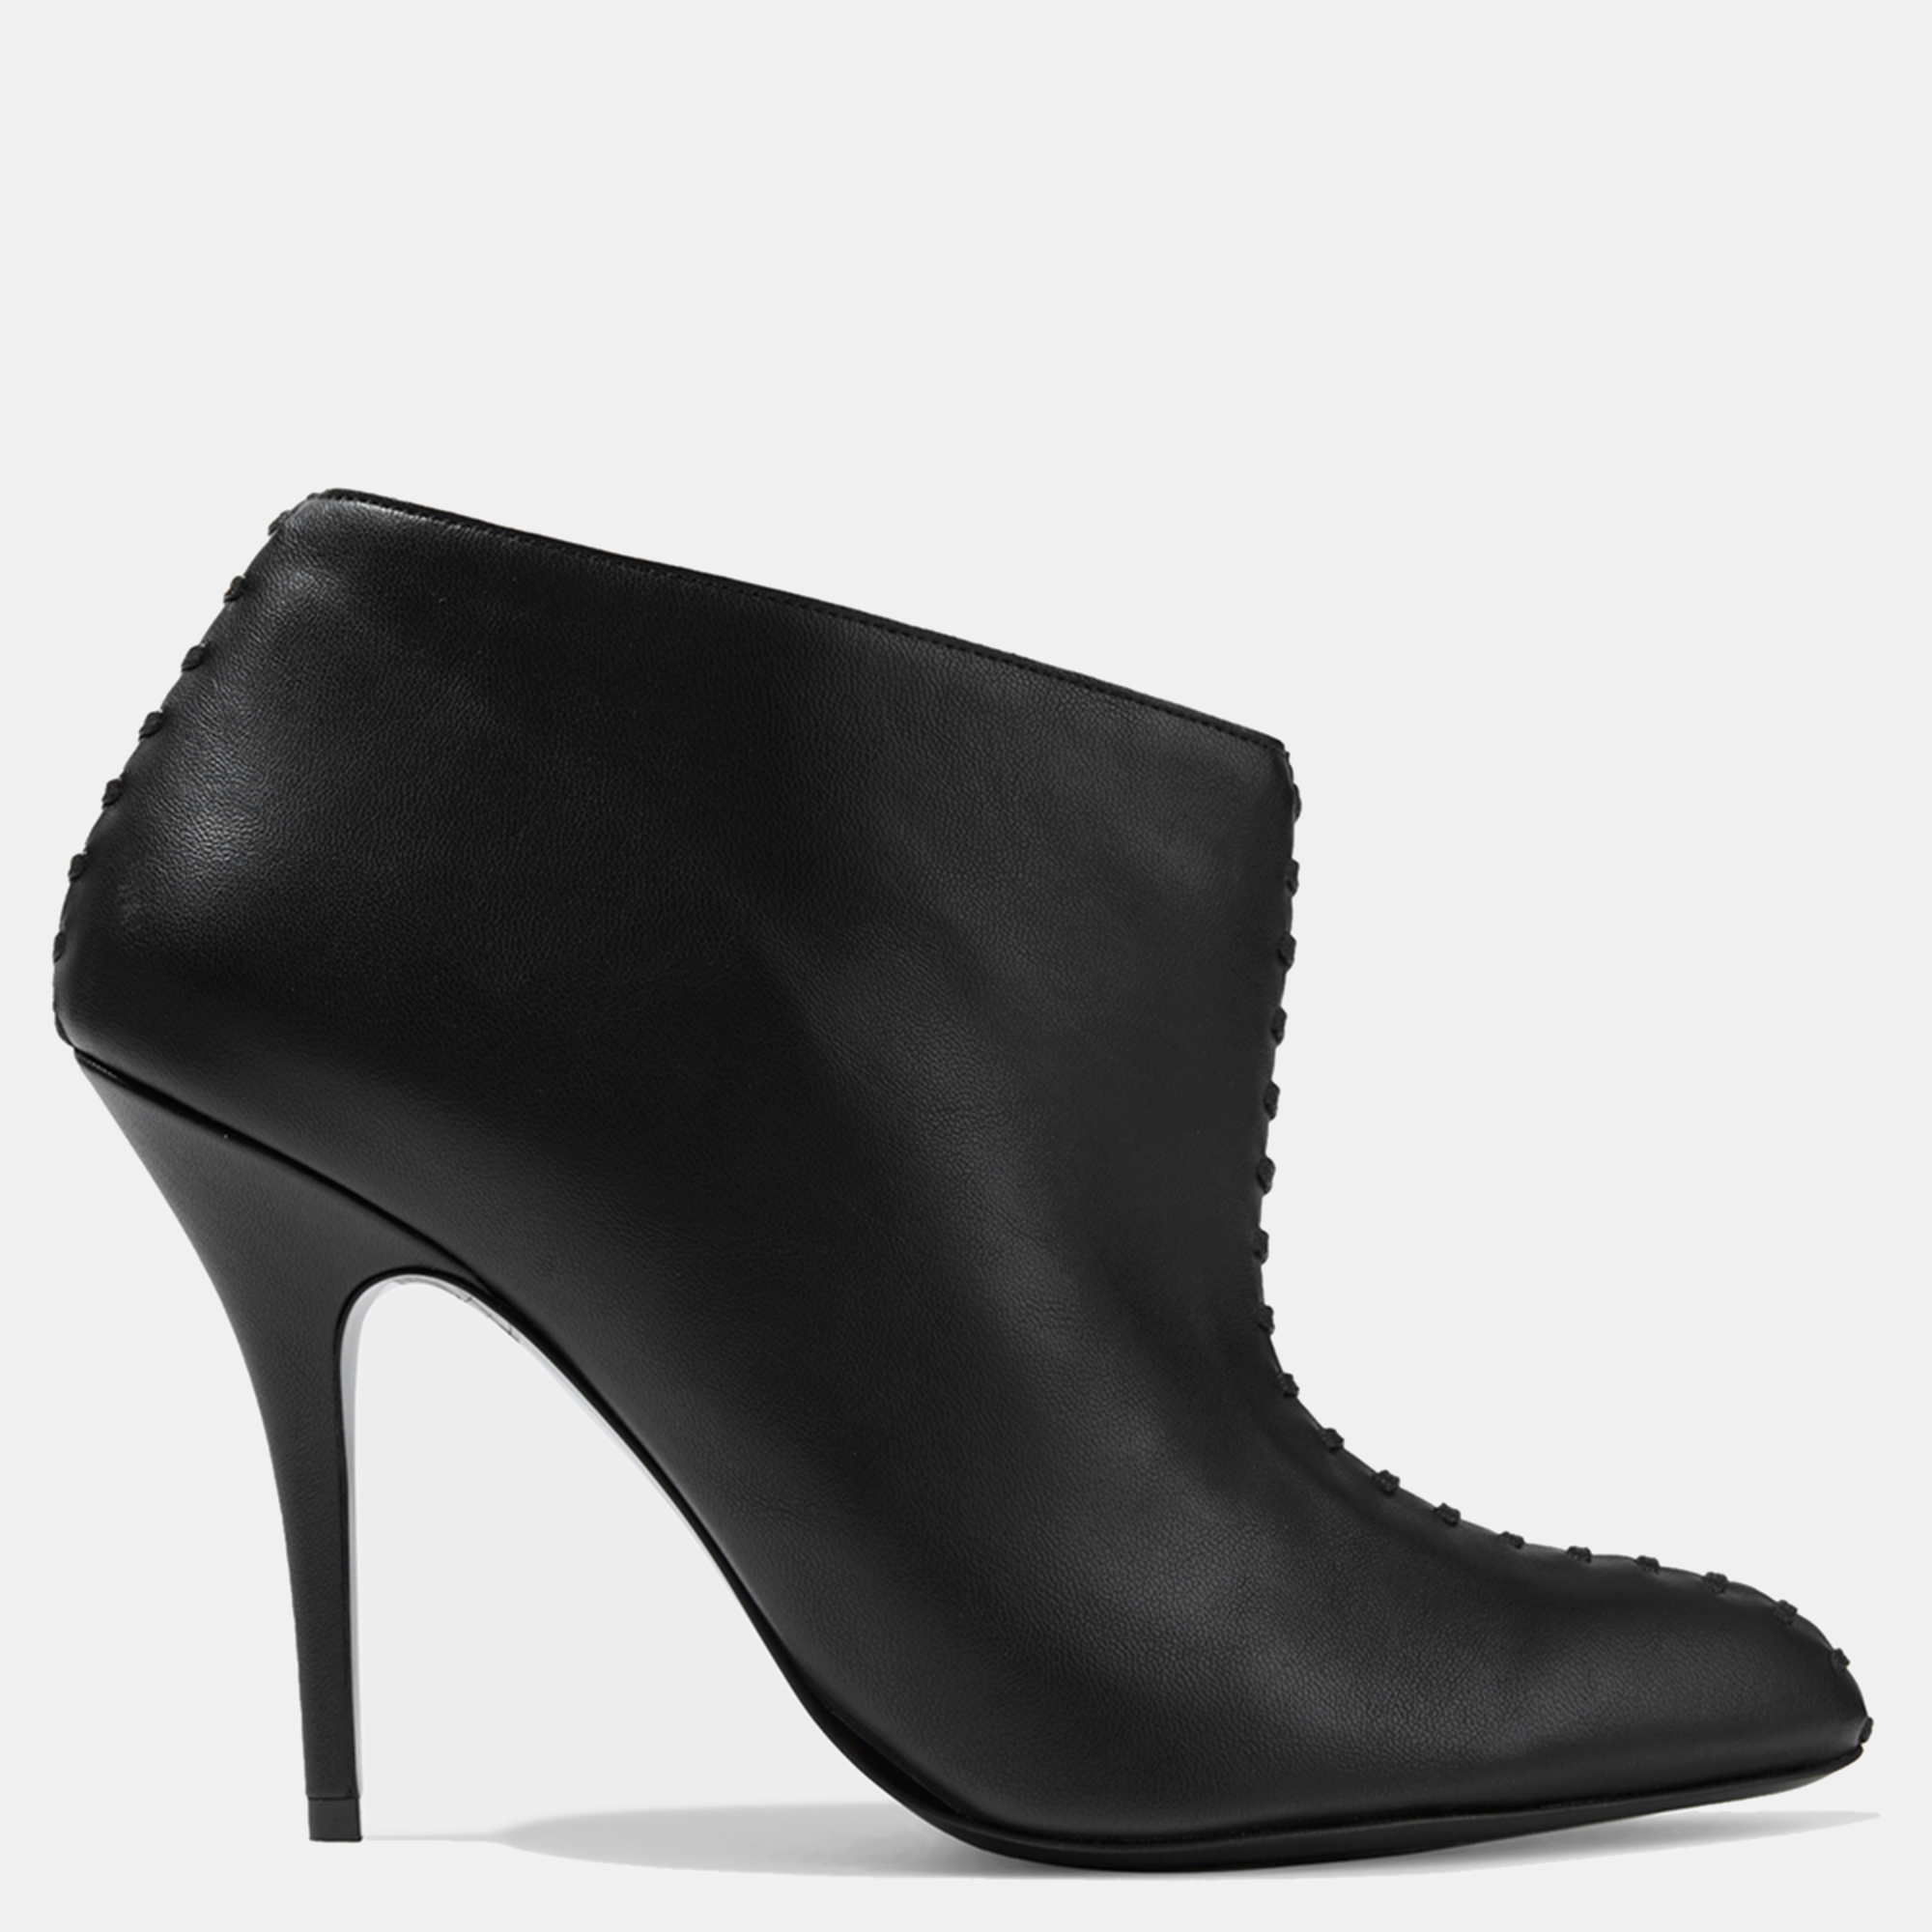 Stella mccartney faux leather ankle booties 35